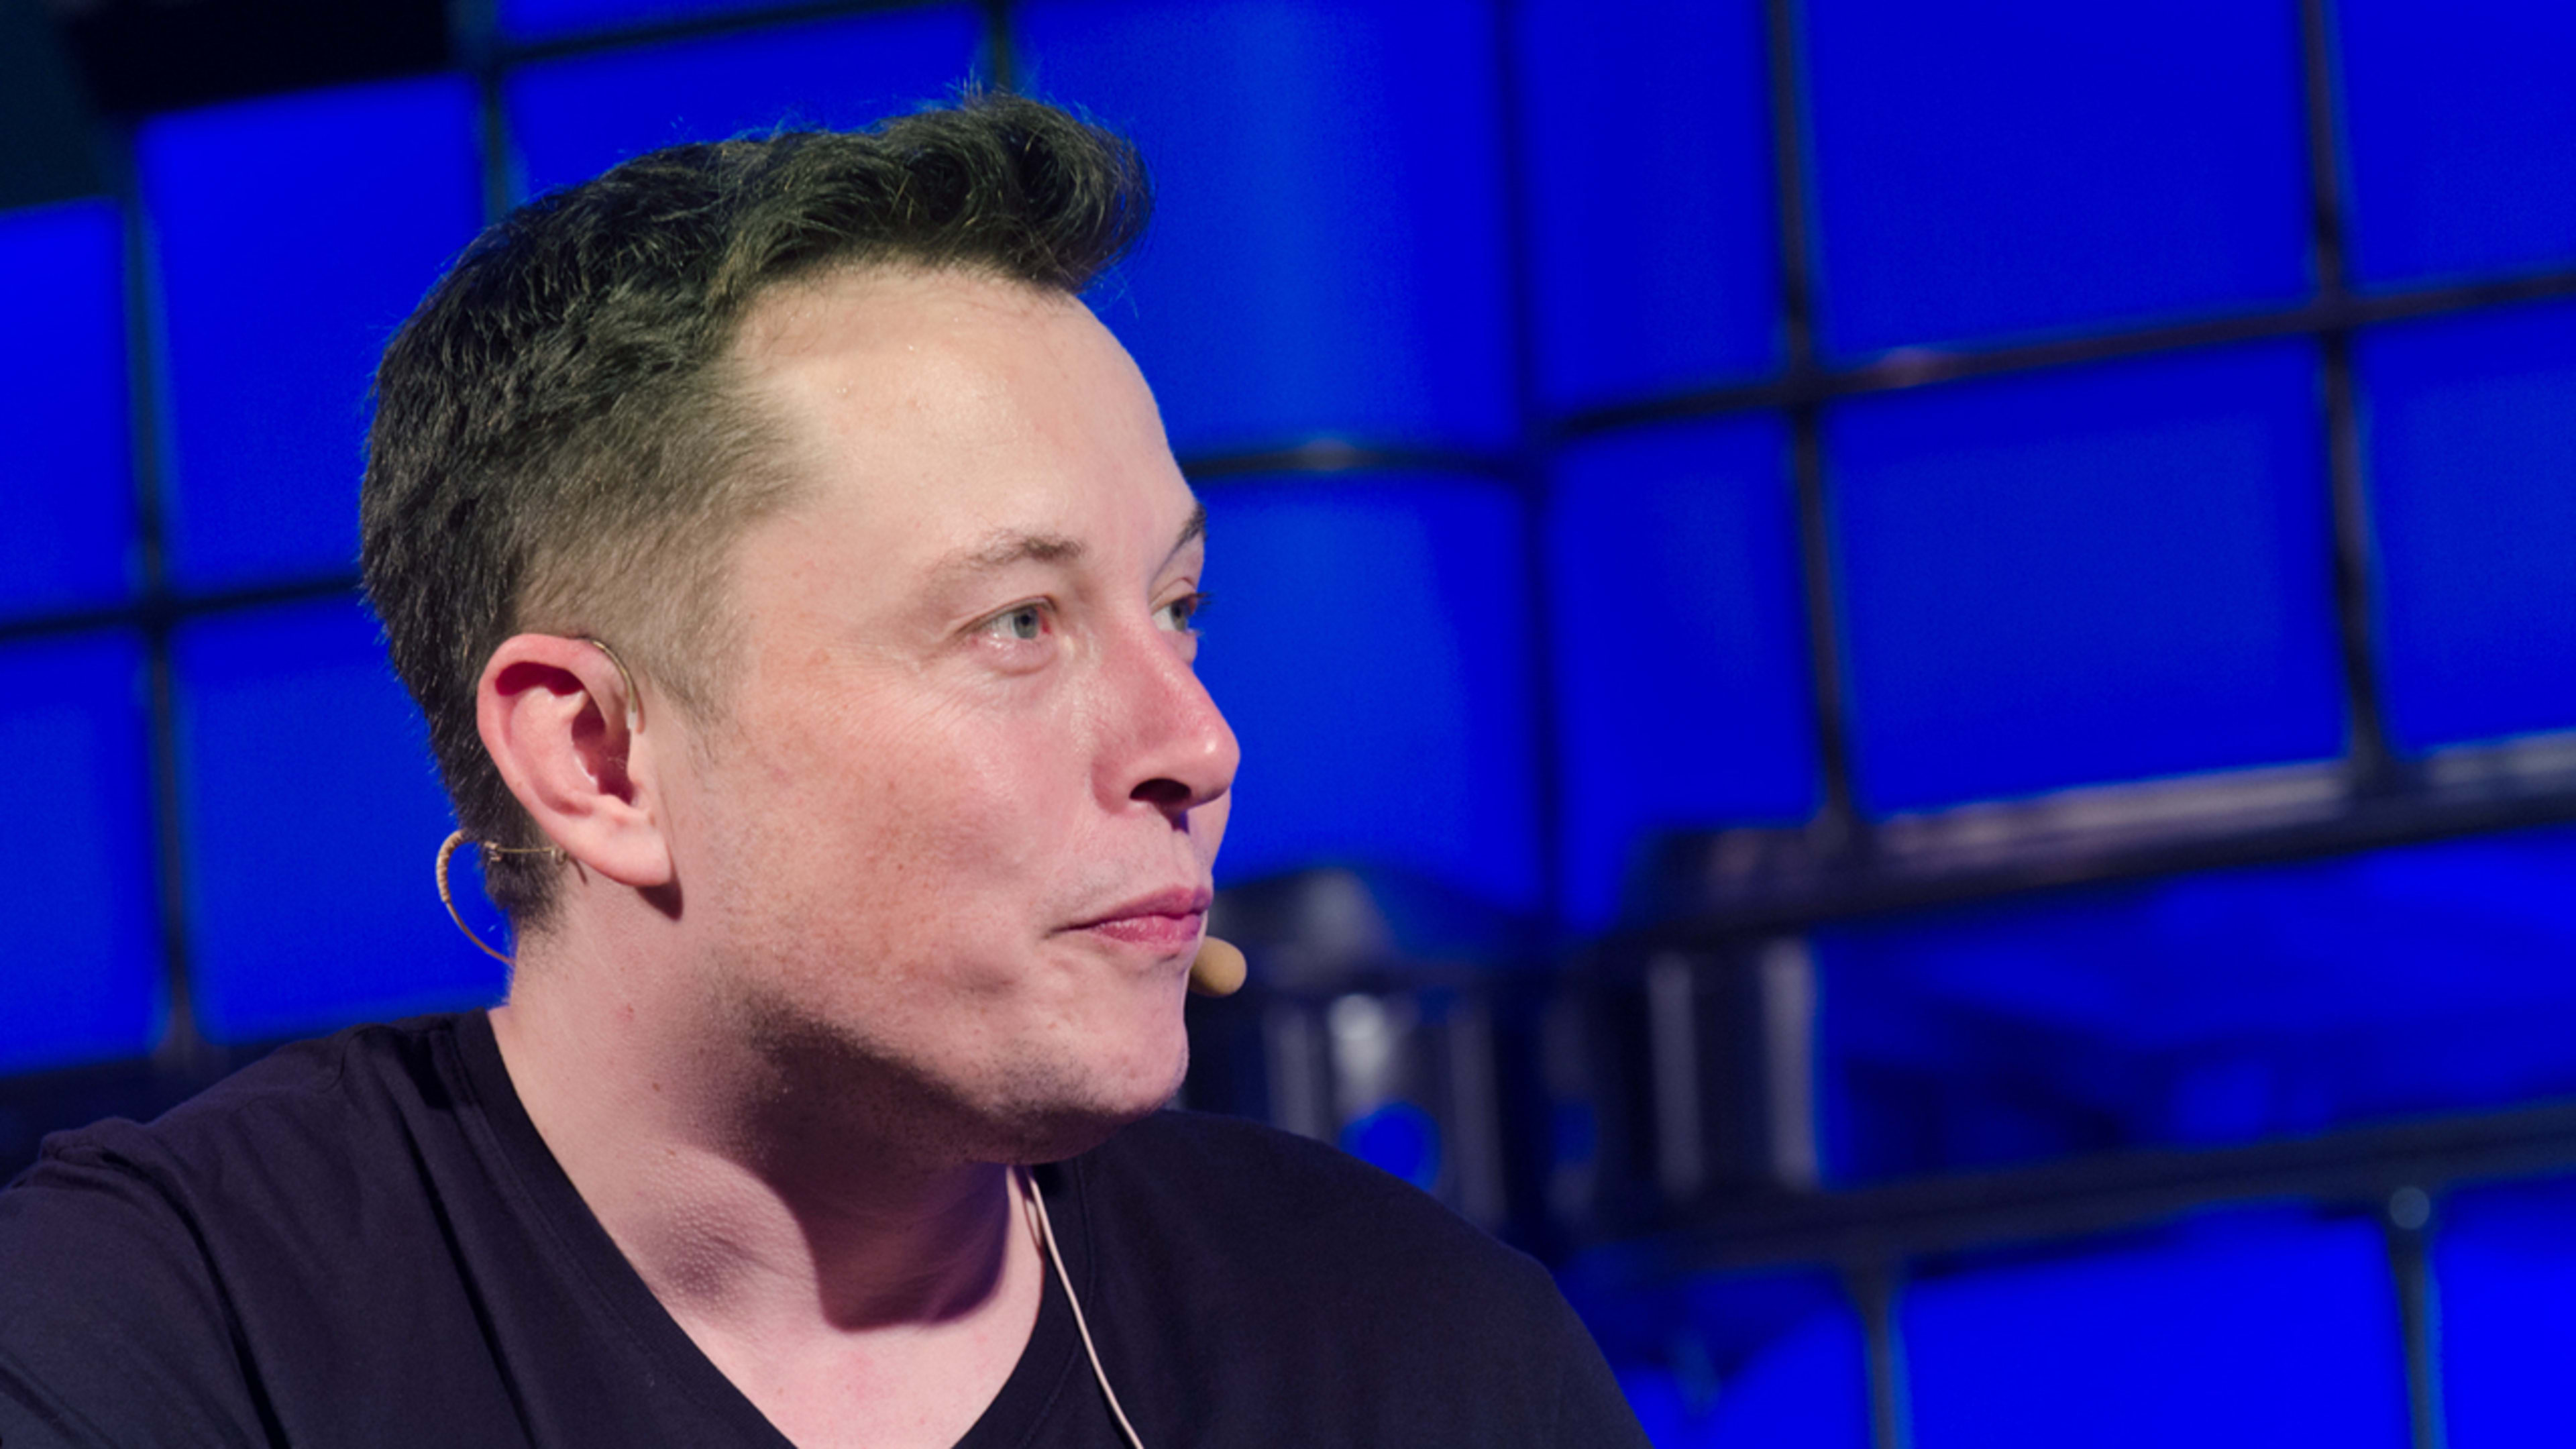 The more Elon Musk tweets, the more followers he loses